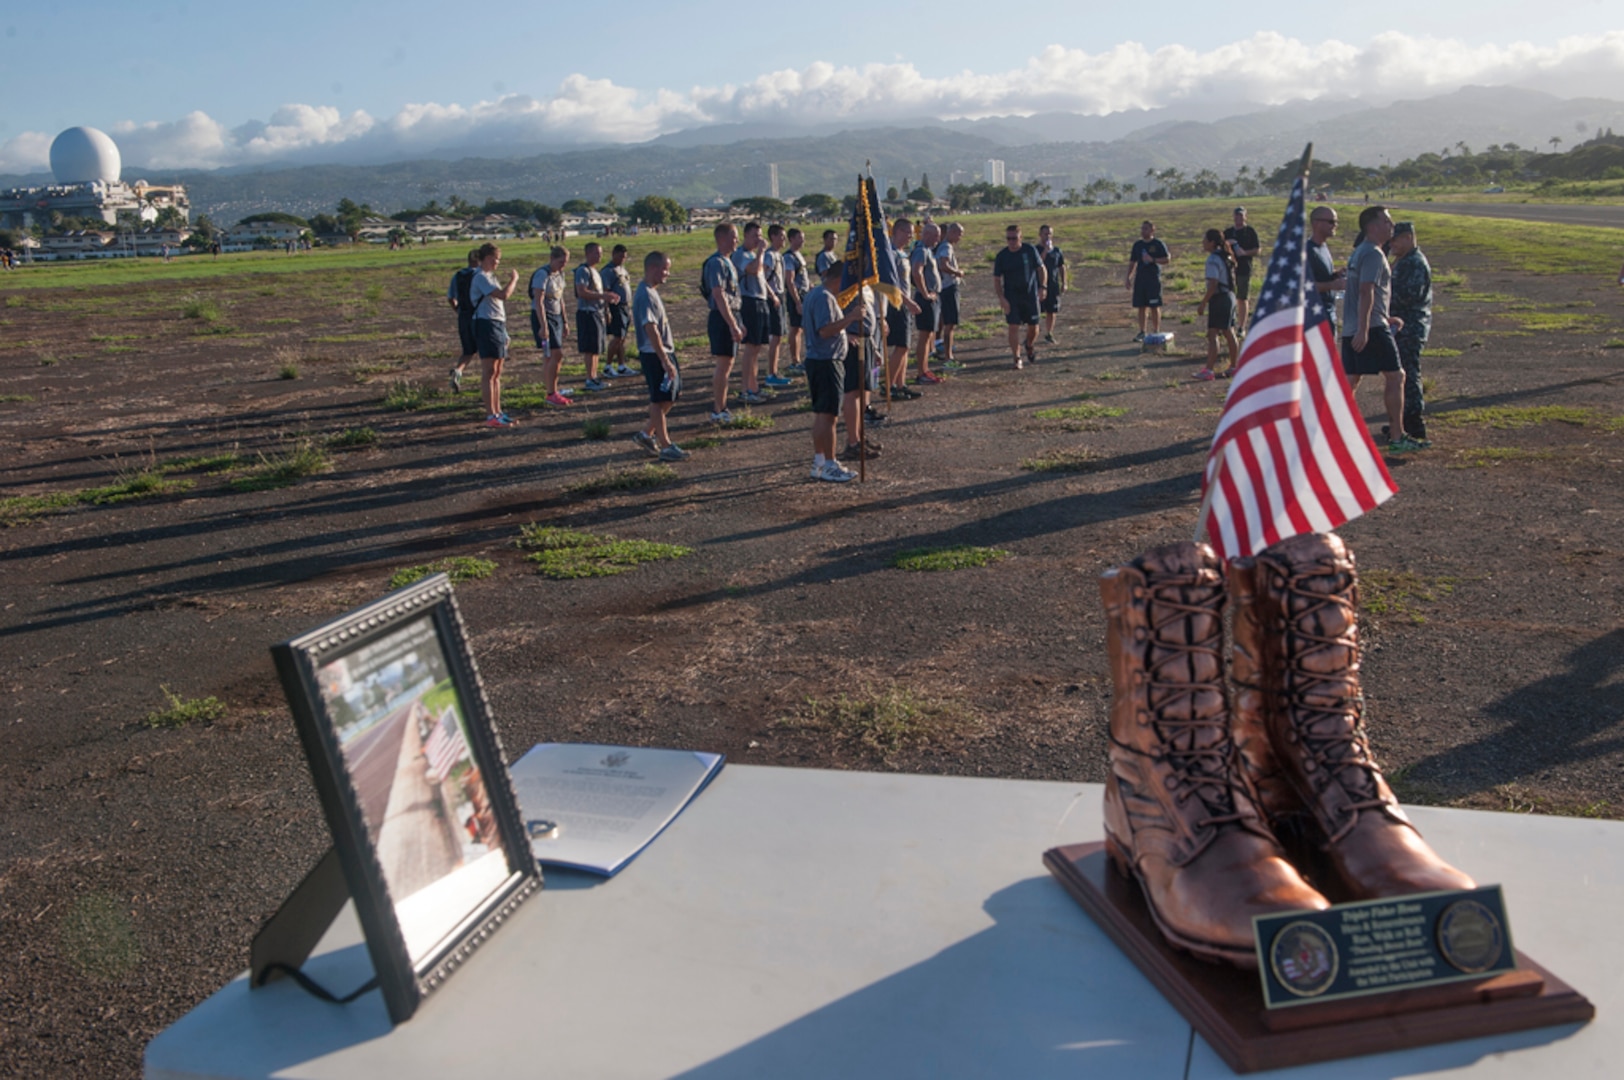 A U.S. Navy running team consisting of chief petty officers and chief petty officers selects stretch after finishing the Fisher House Hero and Remembrance Run, Walk or Roll event at Ford Island, Sept. 5, 2015, at Joint Base Pearl Harbor-Hickam, Hawaii. More than 7,000 combat boots were placed along the 8K route, each adorned with a photo of a service member who gave their life while serving their country after 9/11. 